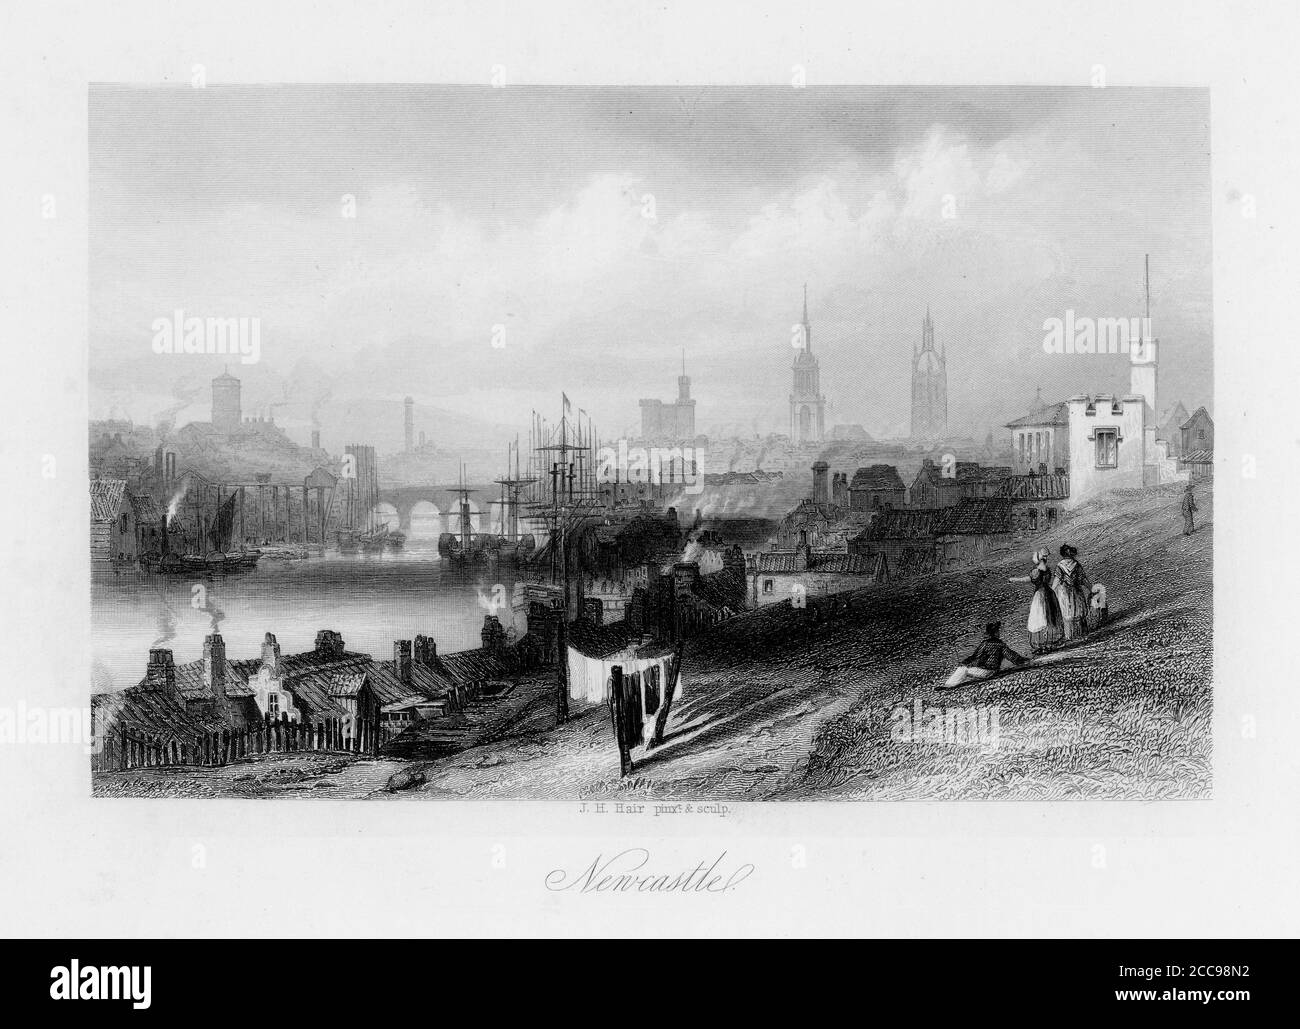 Newcastle - c.1850 - Newcastle / Newcastle-upon-Tyne drawn and engraved by J H Hair and published in Payne's Universum Artist (London: Brain & Payne, c.1850) Stock Photo